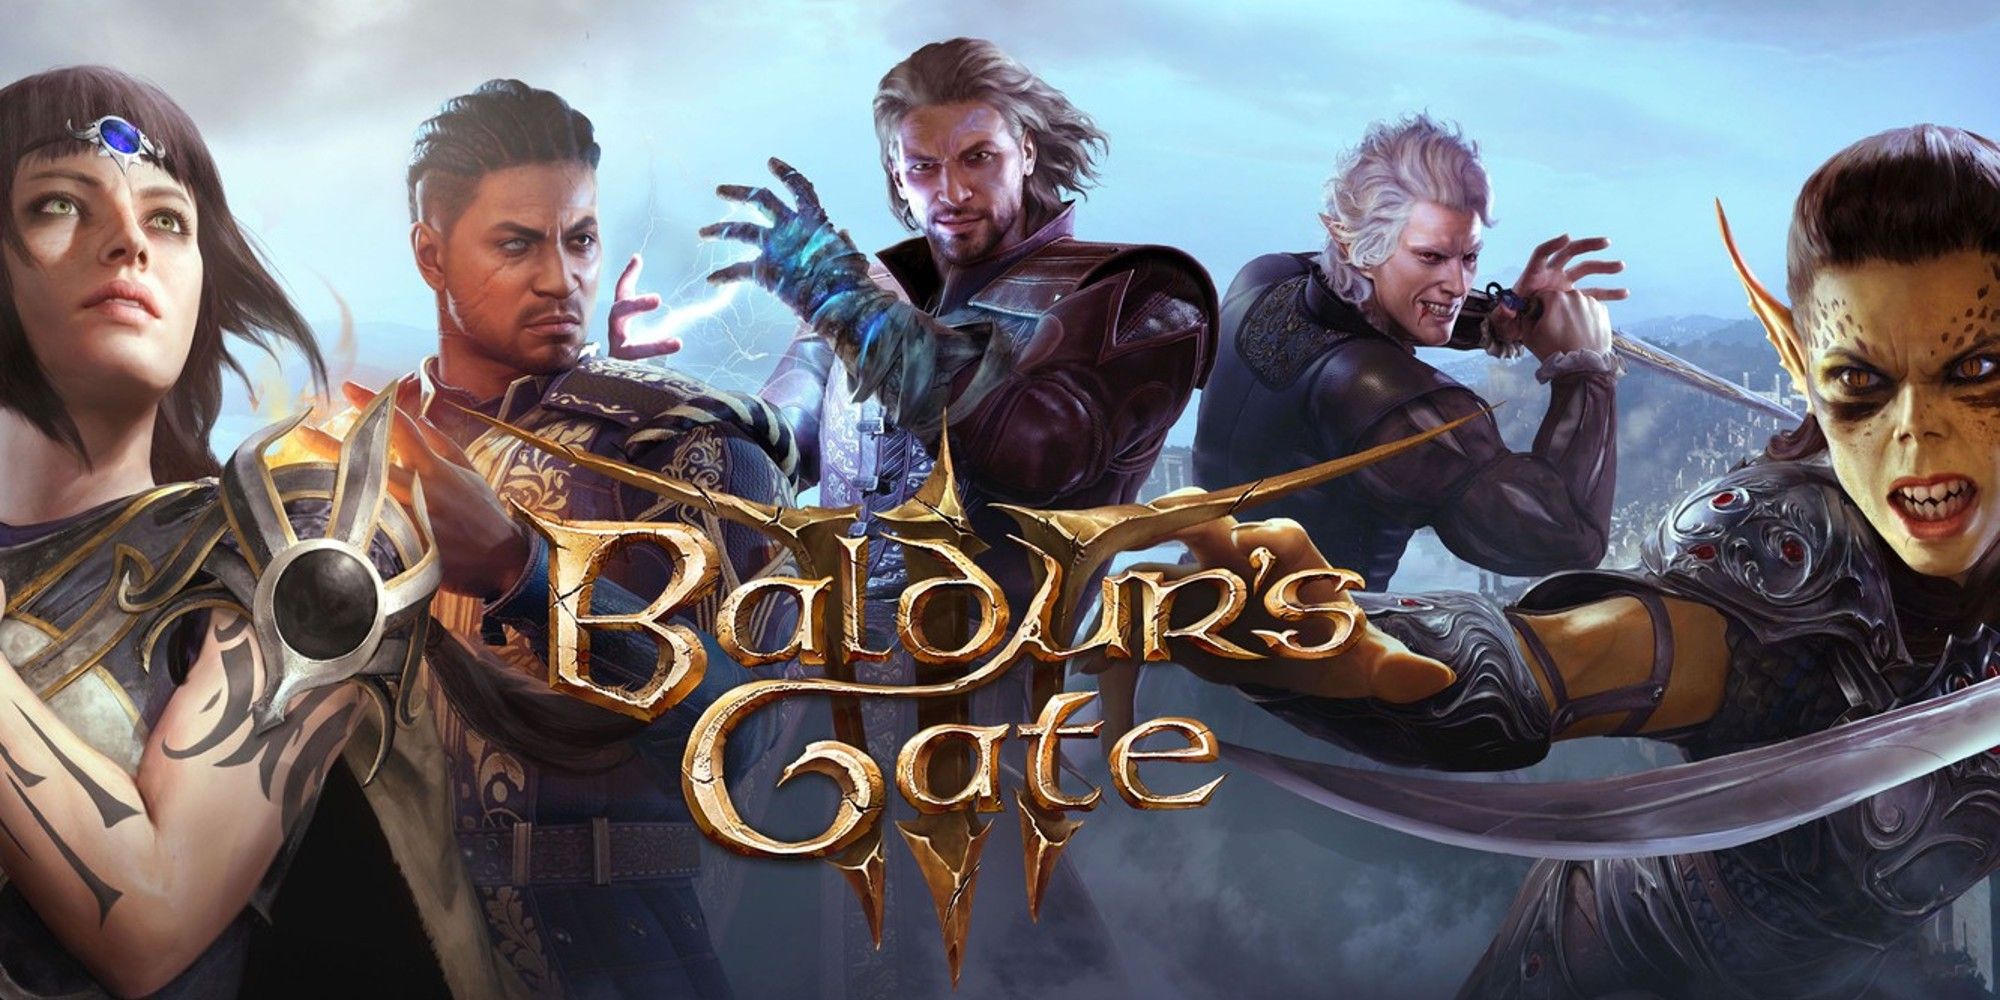 Baldur's Gate 3 Official art with titel and five characters: Shadowheart, Will, Gale, Astarion and Lae'zel